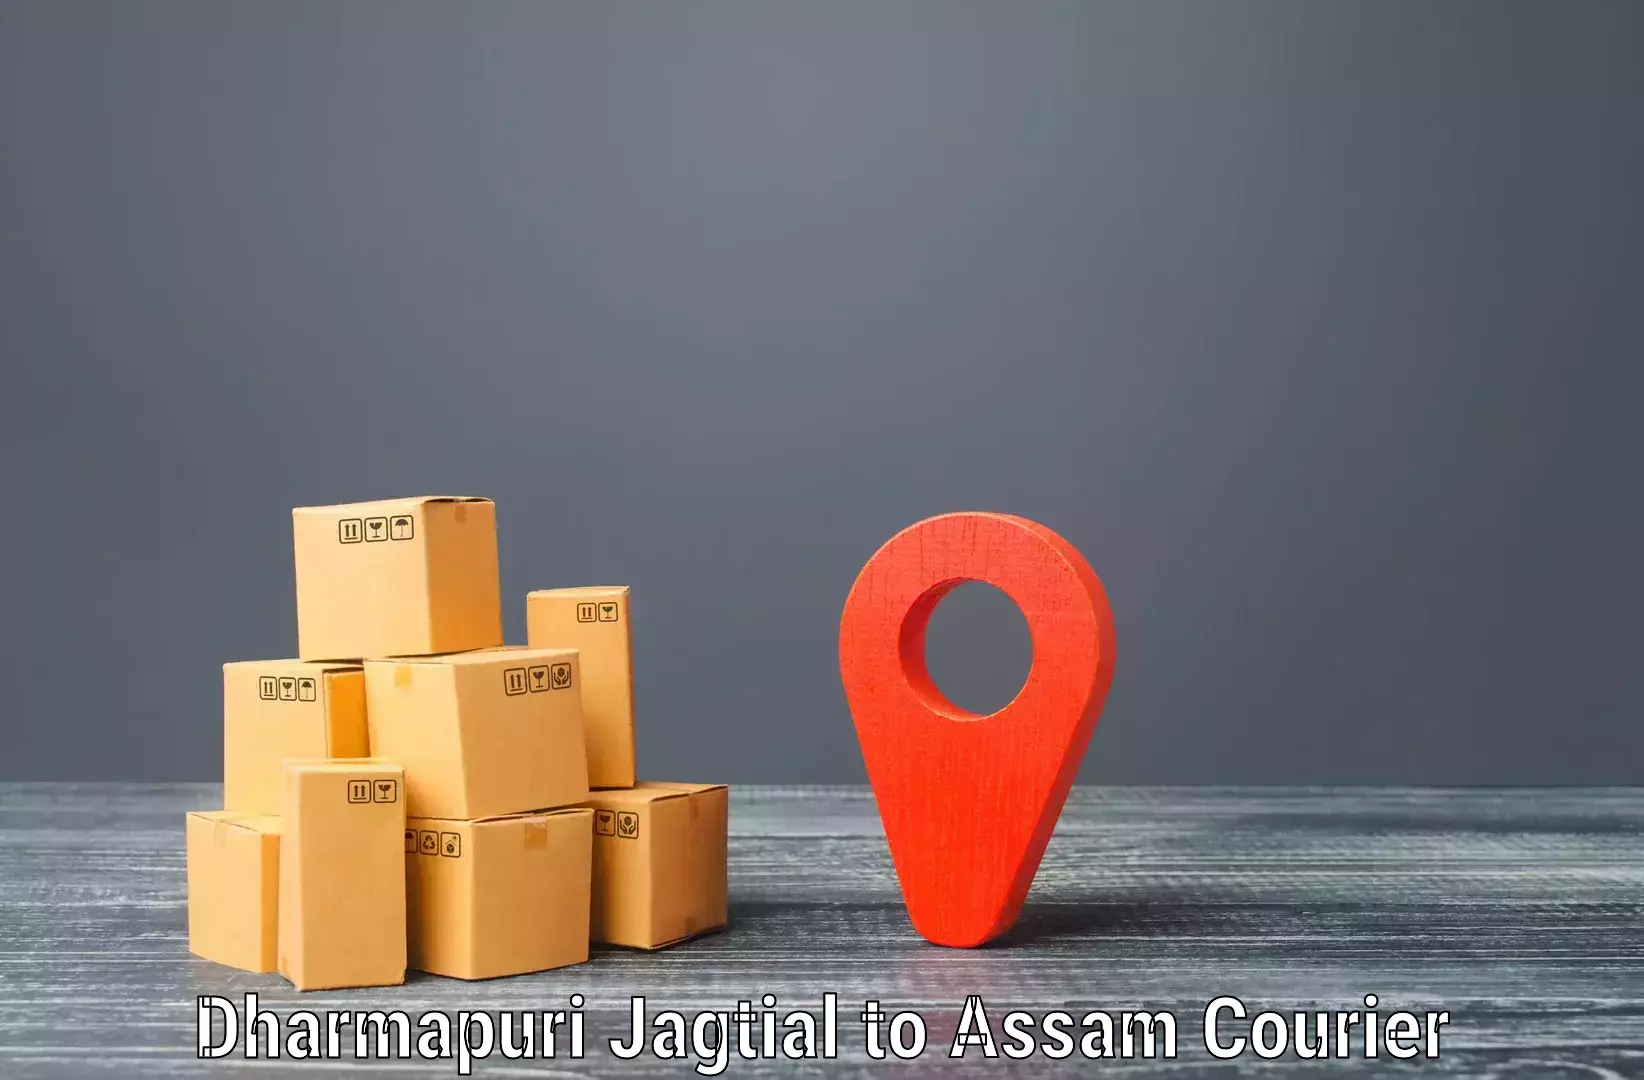 On-call courier service in Dharmapuri Jagtial to Sonitpur